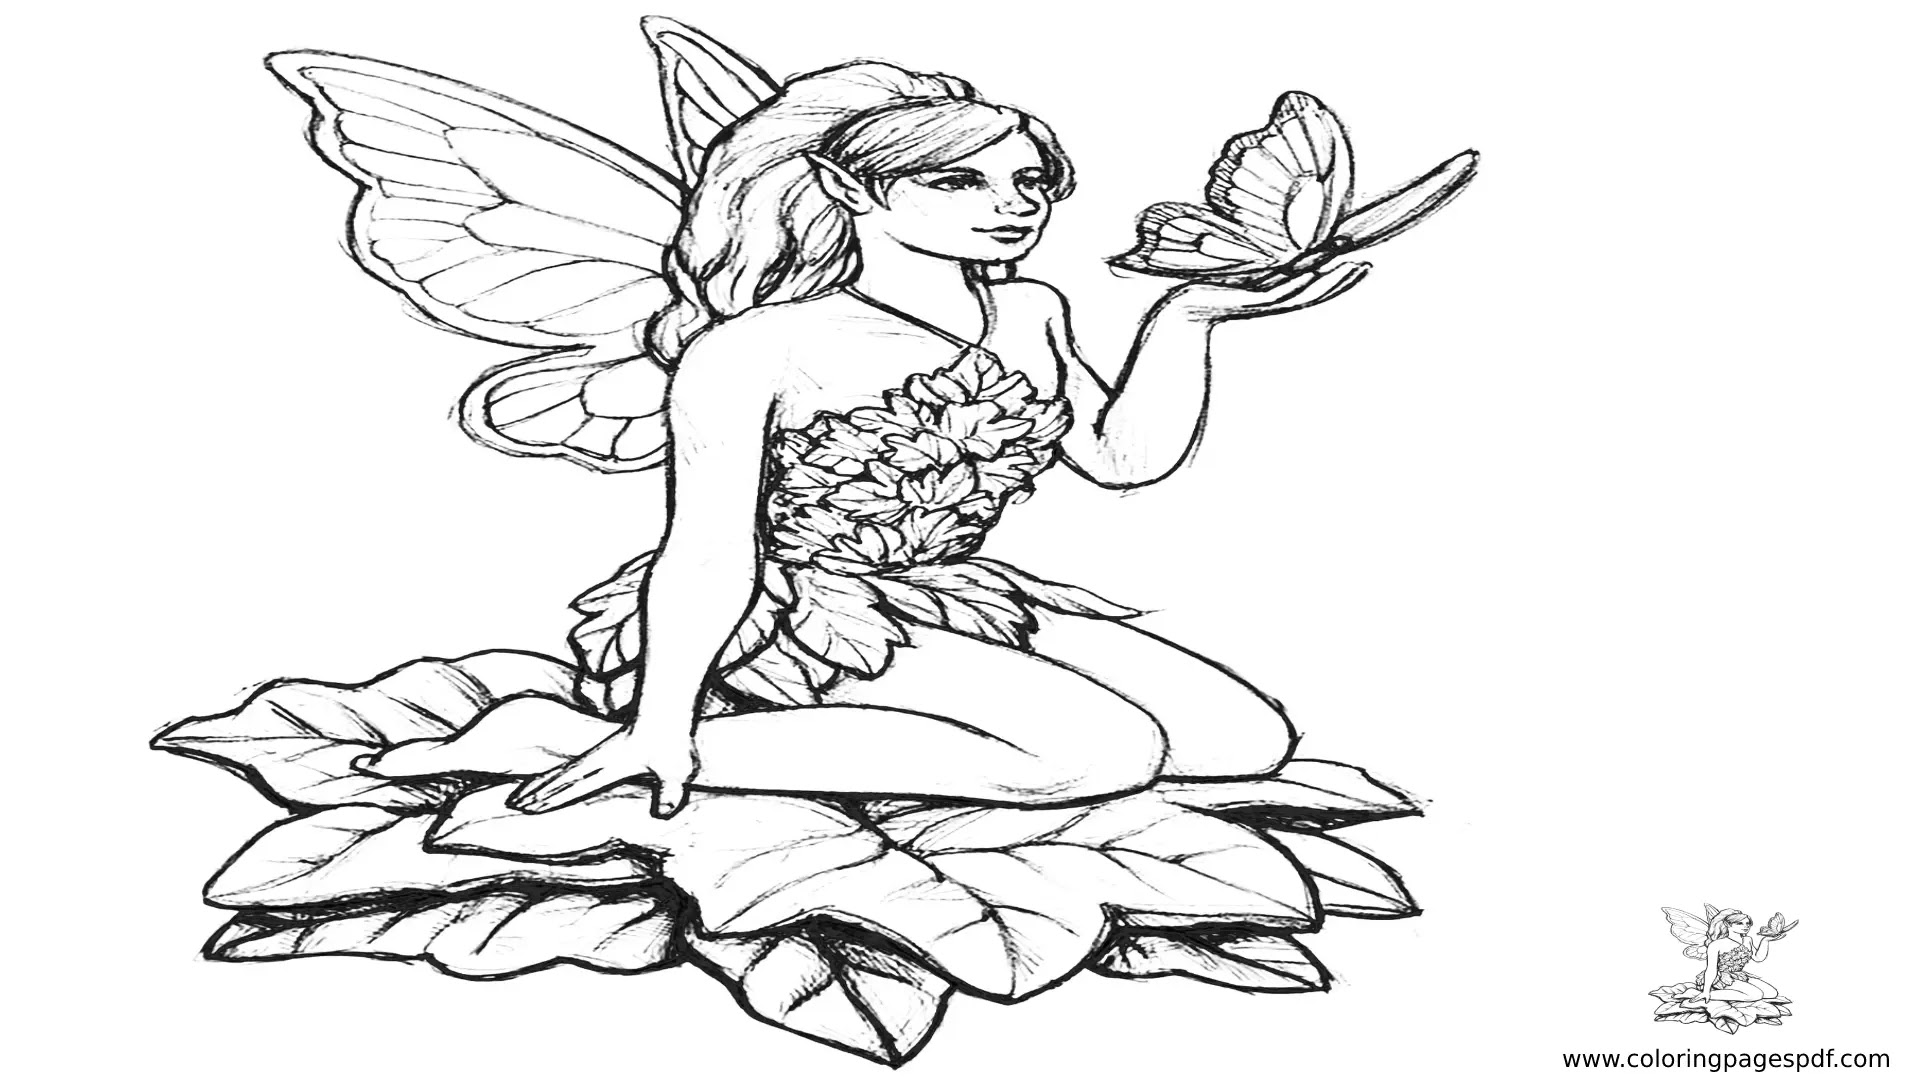 Coloring Pages Of A Realistic Fairy Holding A Butterfly